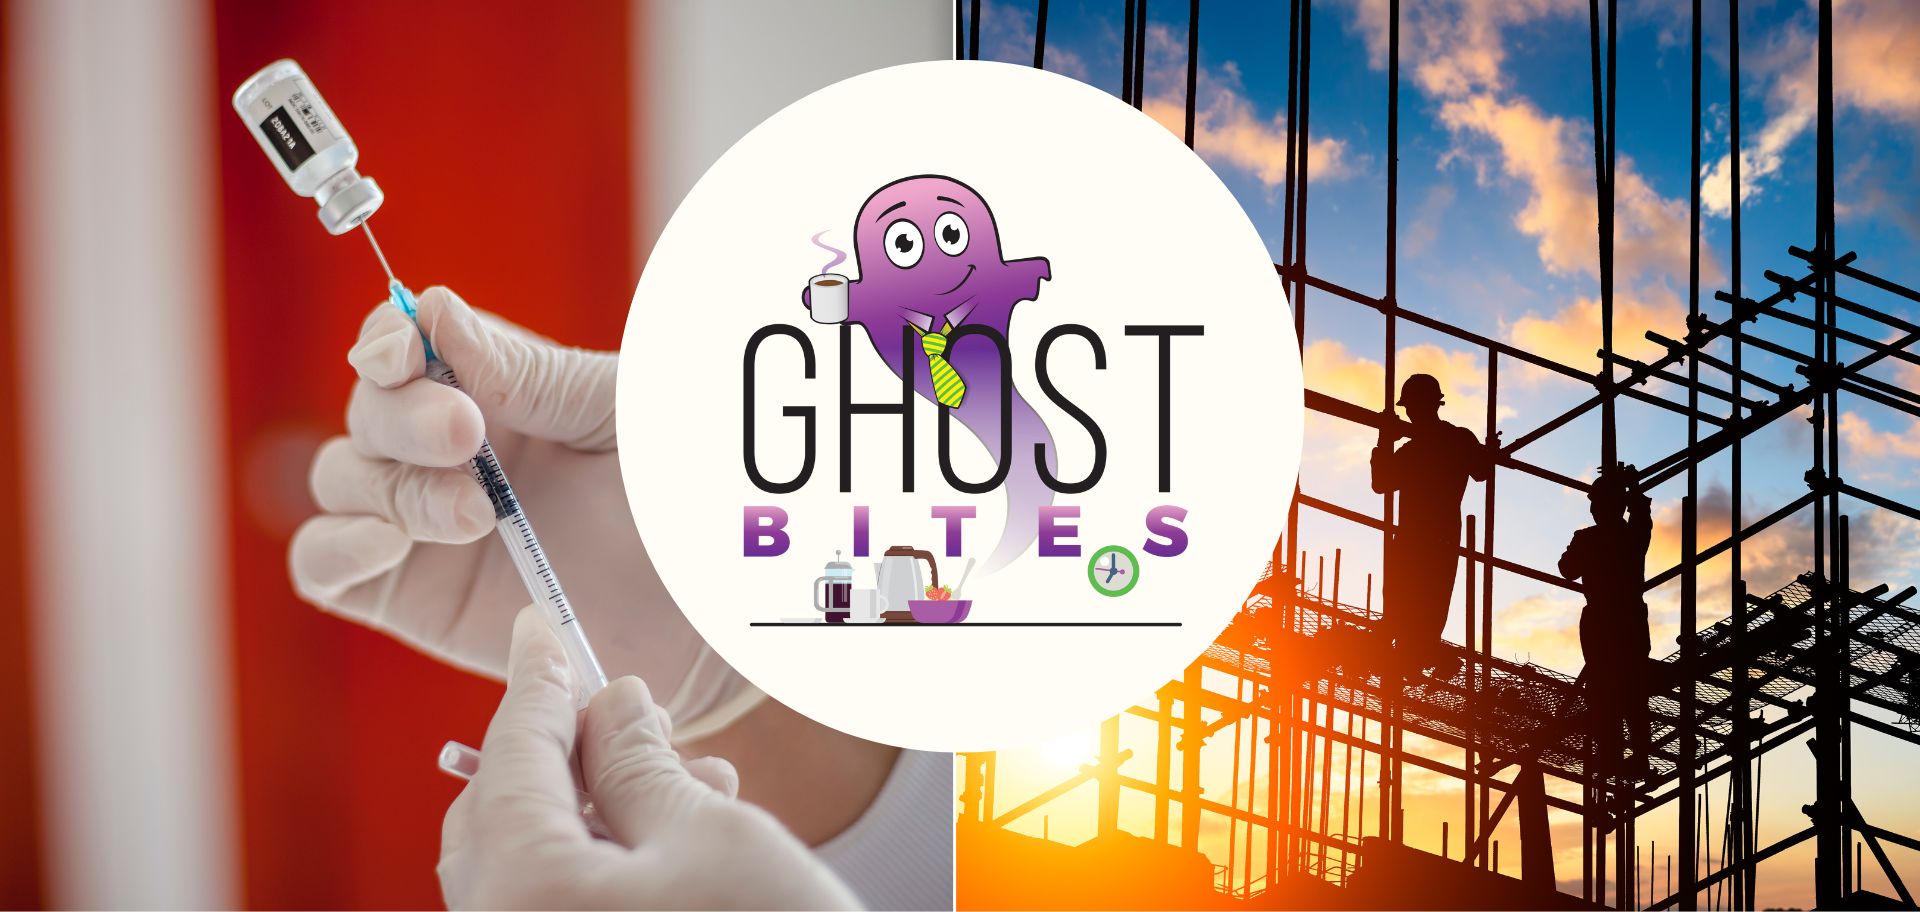 Ghost Bites (AECI | Aspen | Brikor | Capital & Counties | Cashbuild | Caxton & CTP | Cognition | Harmony | Investec Property Fund | MTN | Murray & Roberts | Stefanutti Stocks | Woolworths)